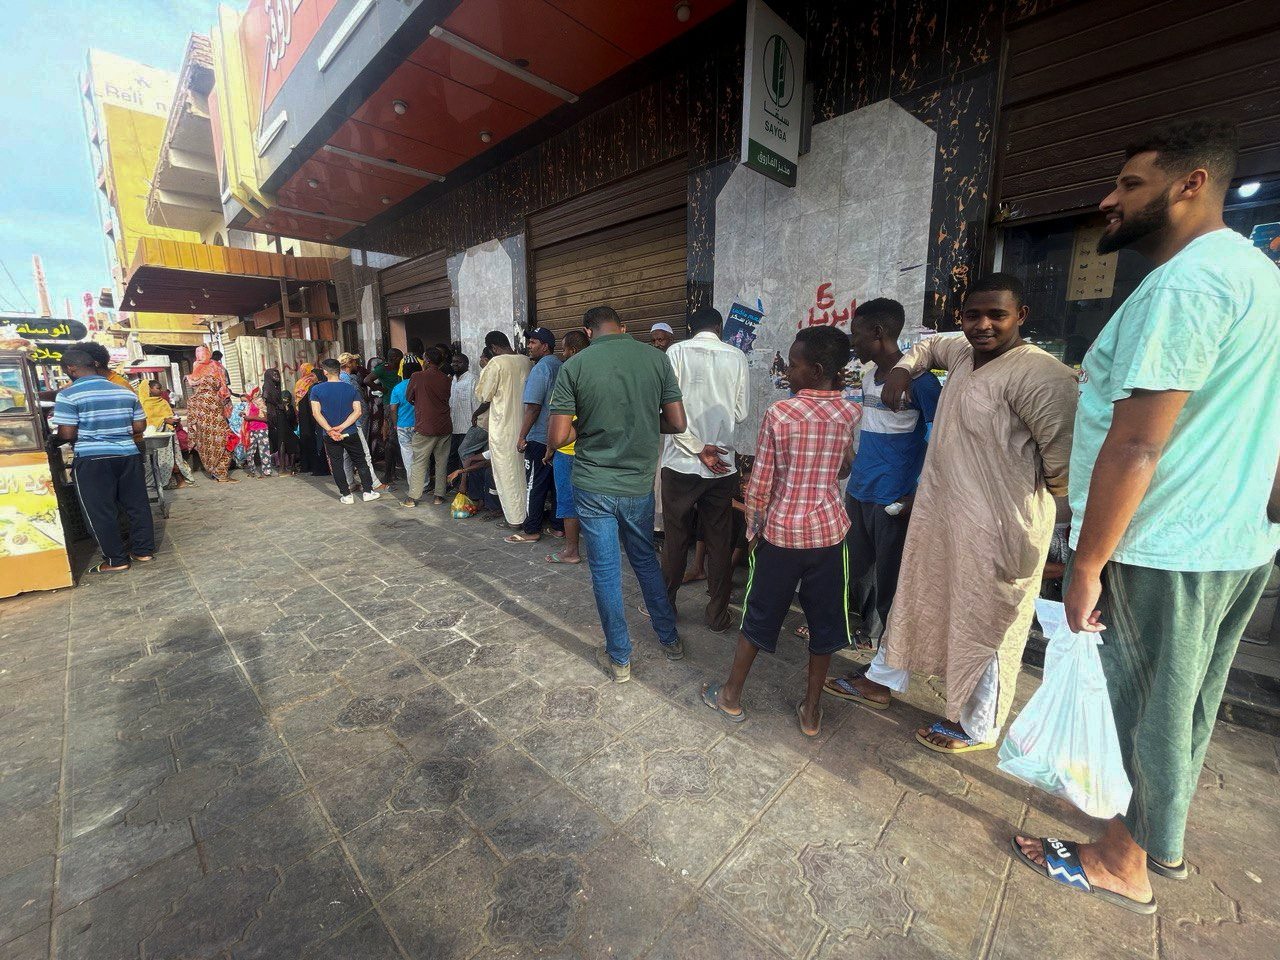 People gather to get bread in Khartoum